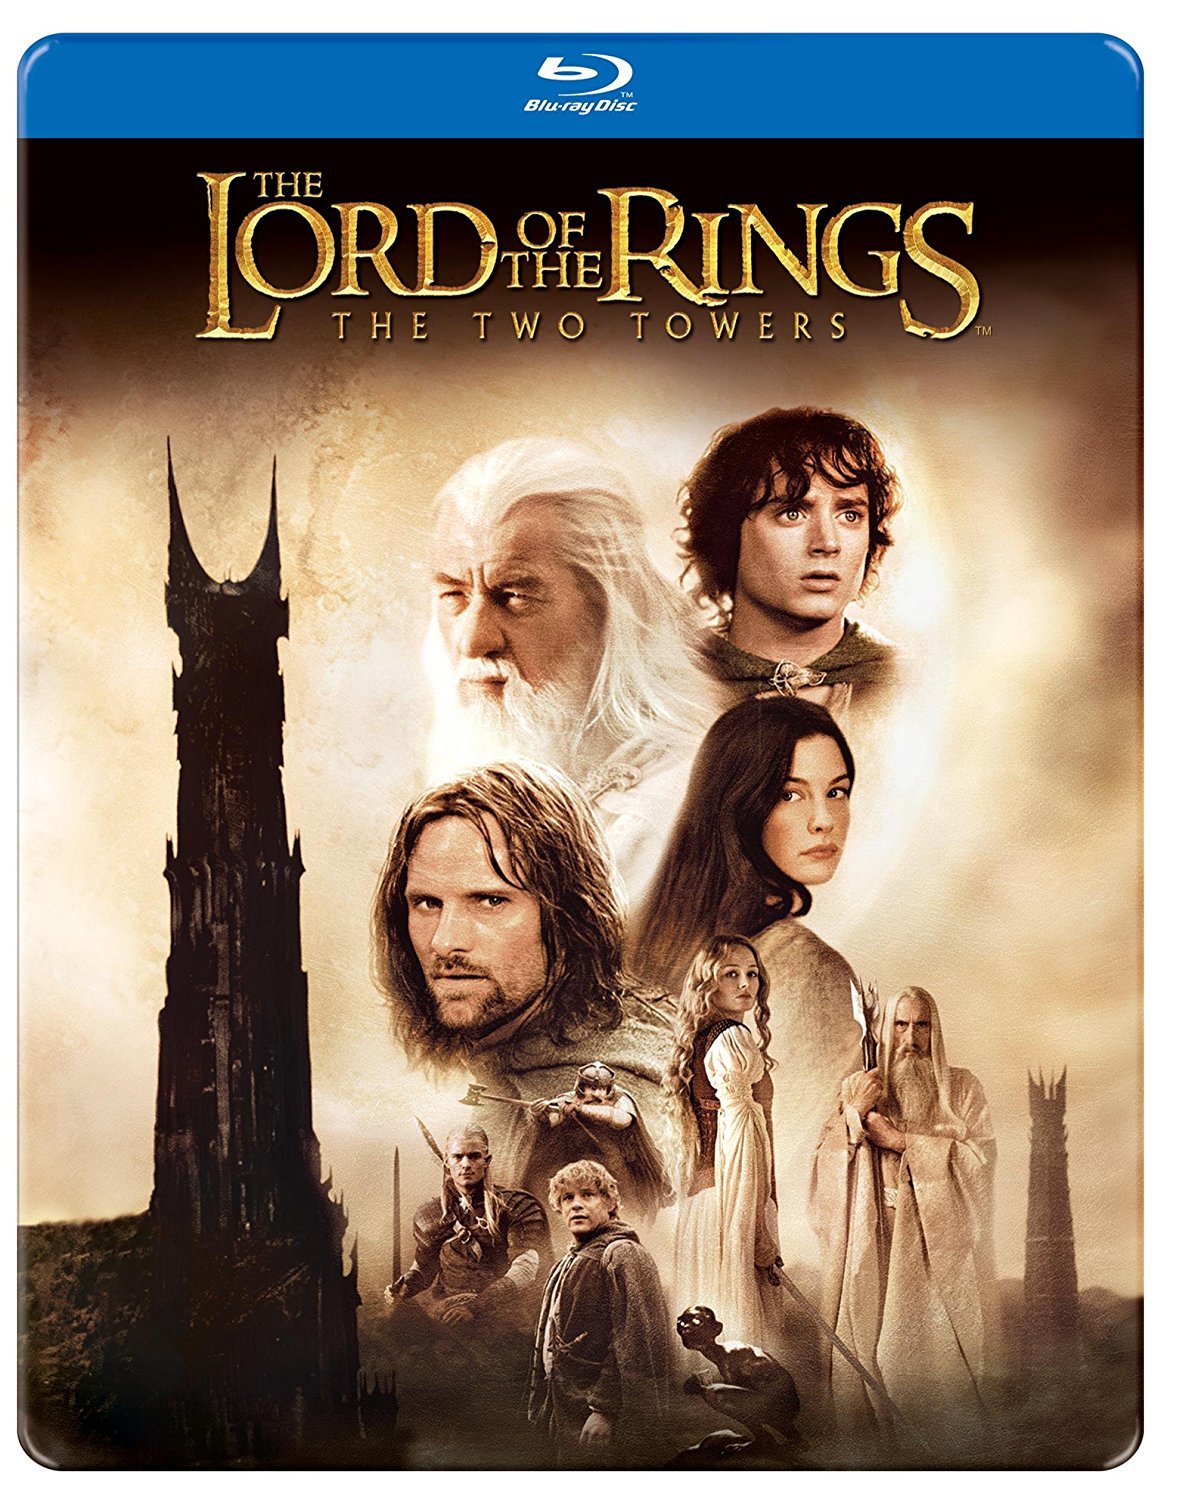 download the new version for windows The Lord of the Rings: The Two Towers